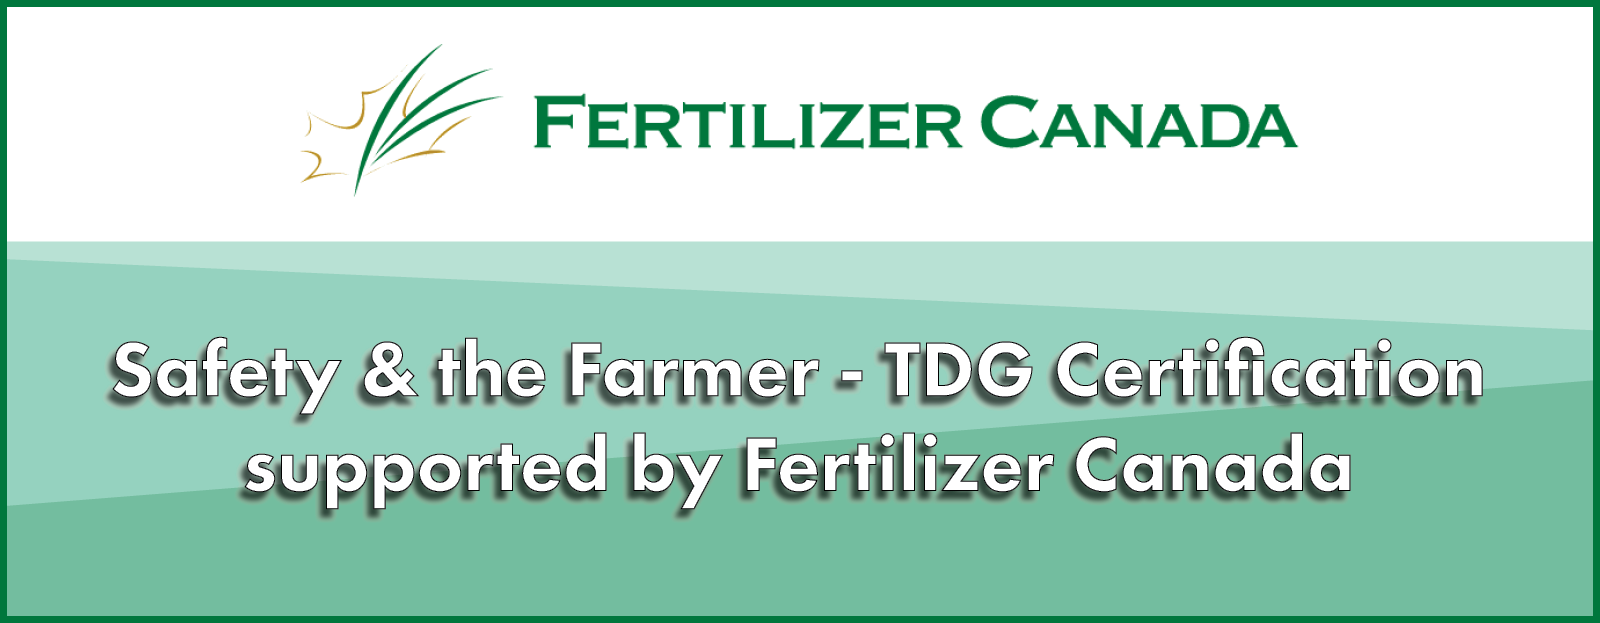 Banner for Fertilizer Canada Safety and the Farmer